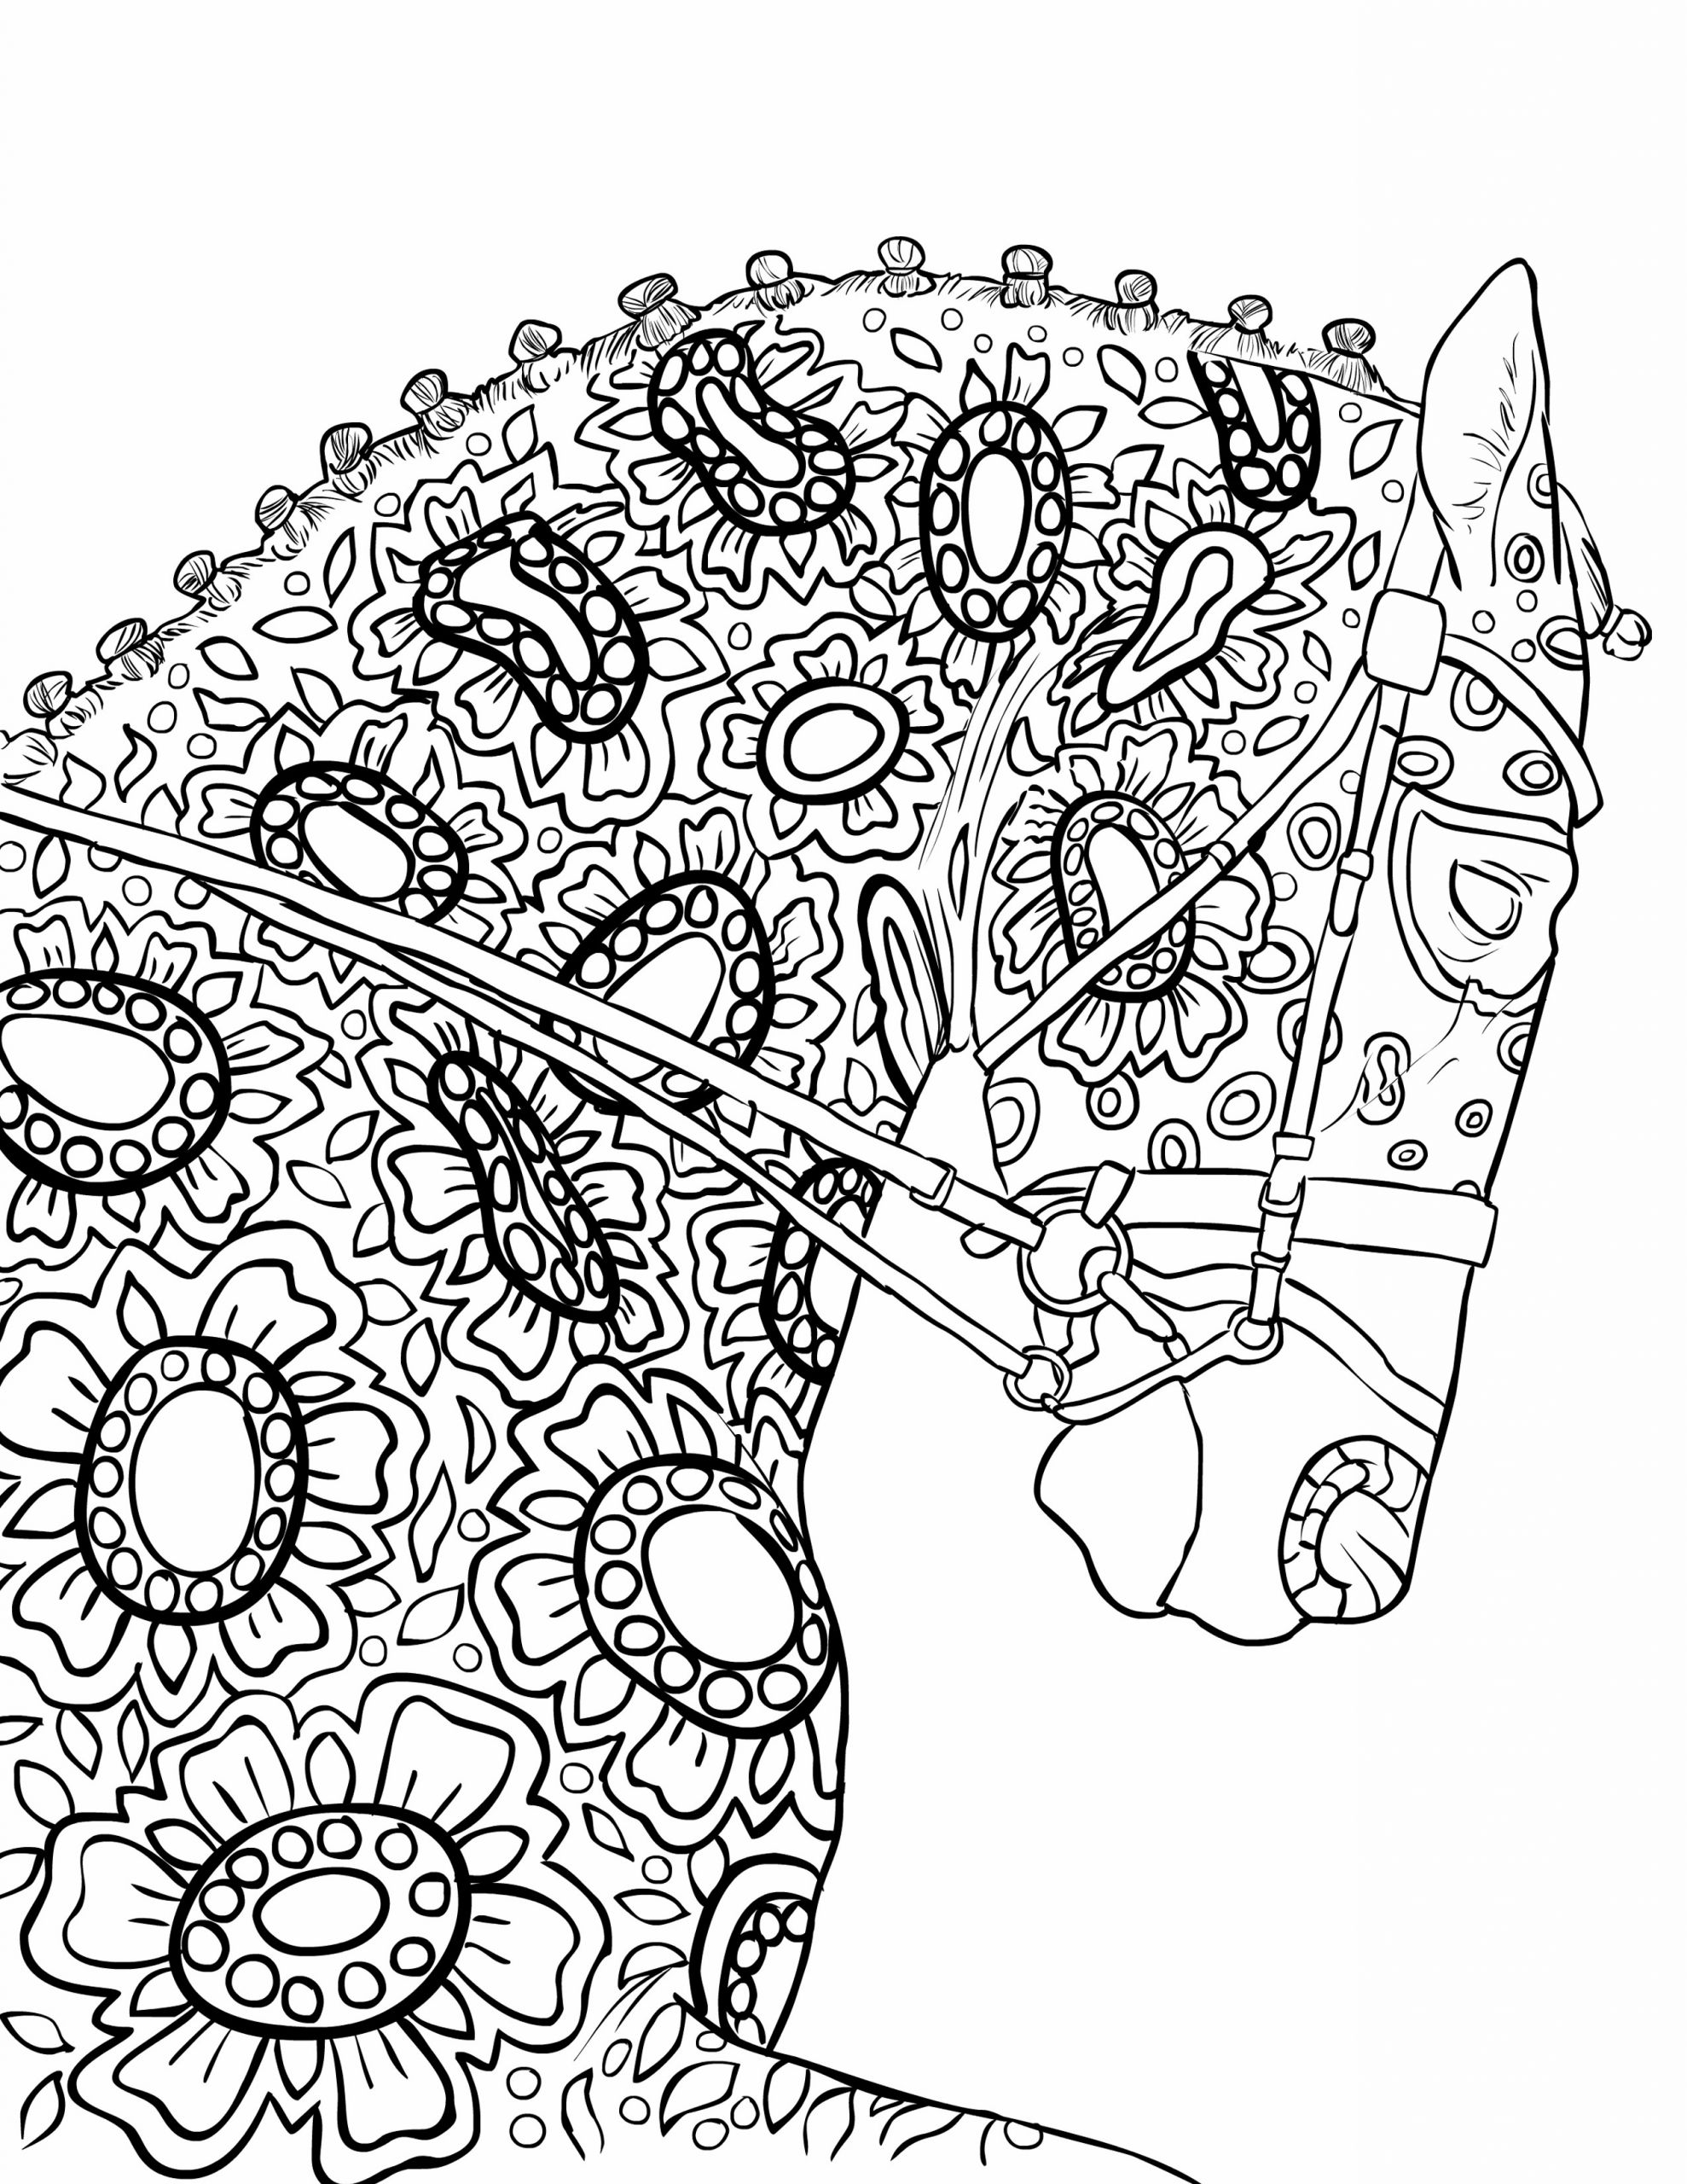 Horse Coloring Pages For Older Kids
 Animal Coloring Pages For Older Children at GetDrawings